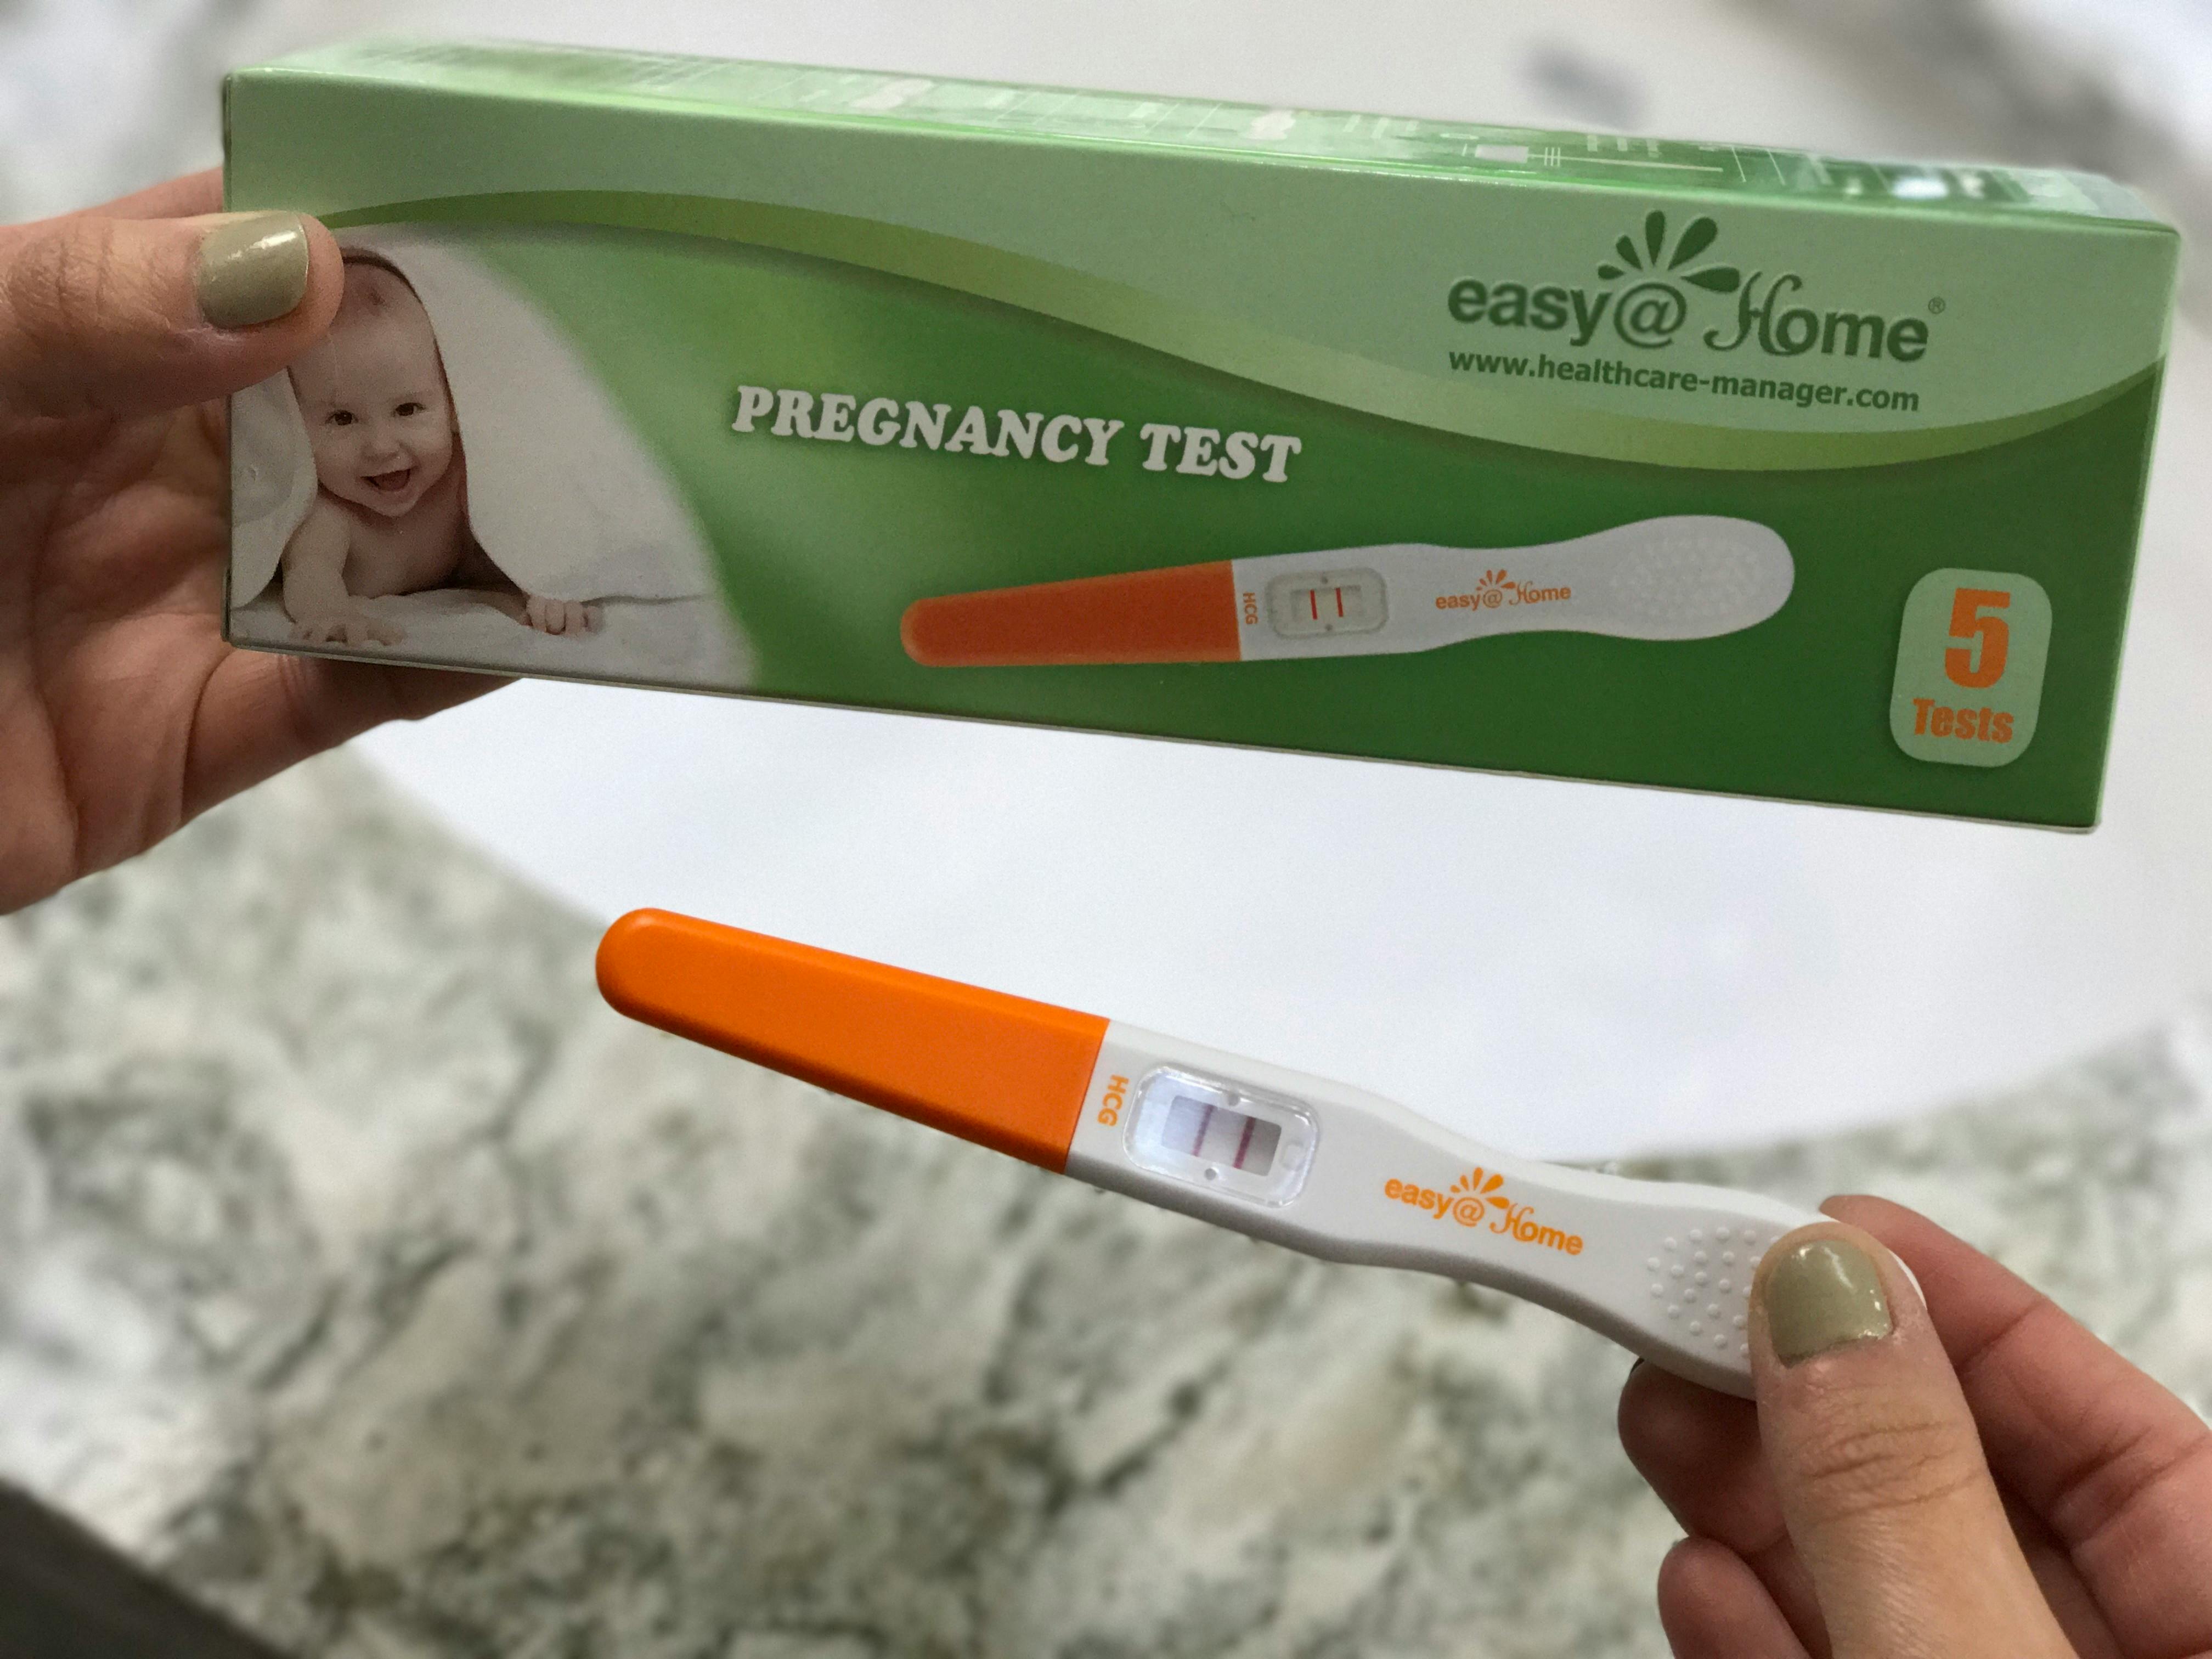 A person holding an Easy@Home pregnancy test.